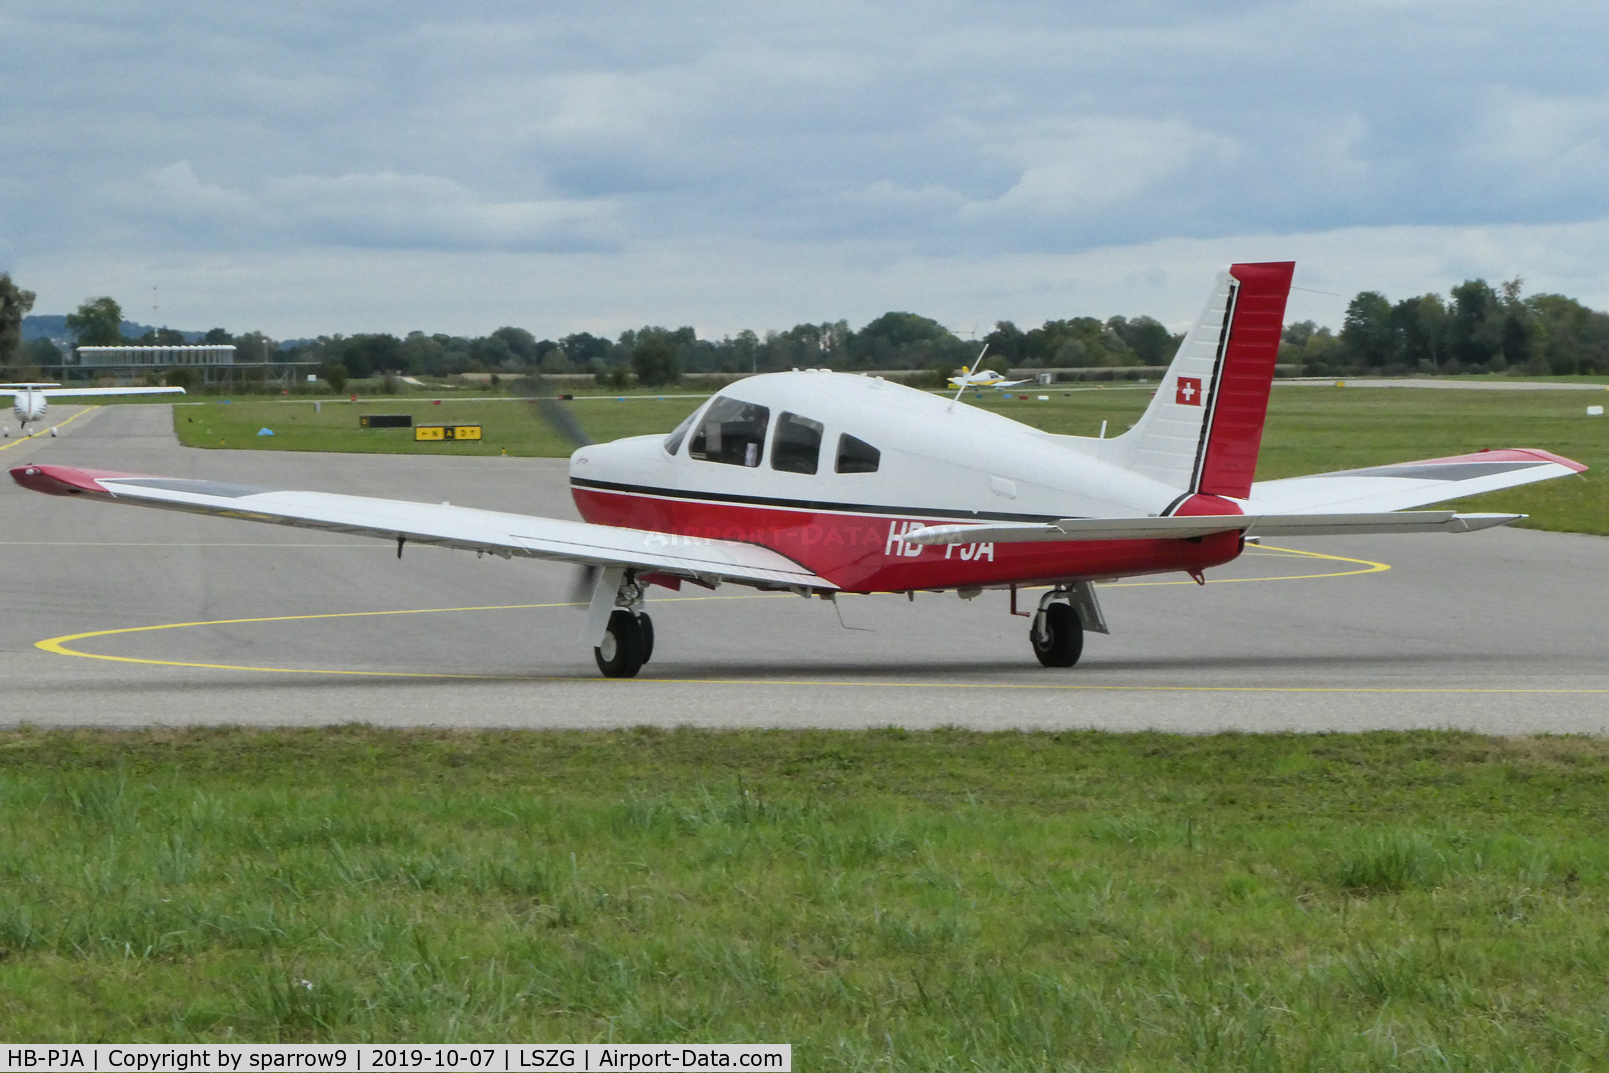 HB-PJA, 2002 Piper PA-28R-201 Cherokee Arrow III C/N 28-44089, Just landed at Grenchen.